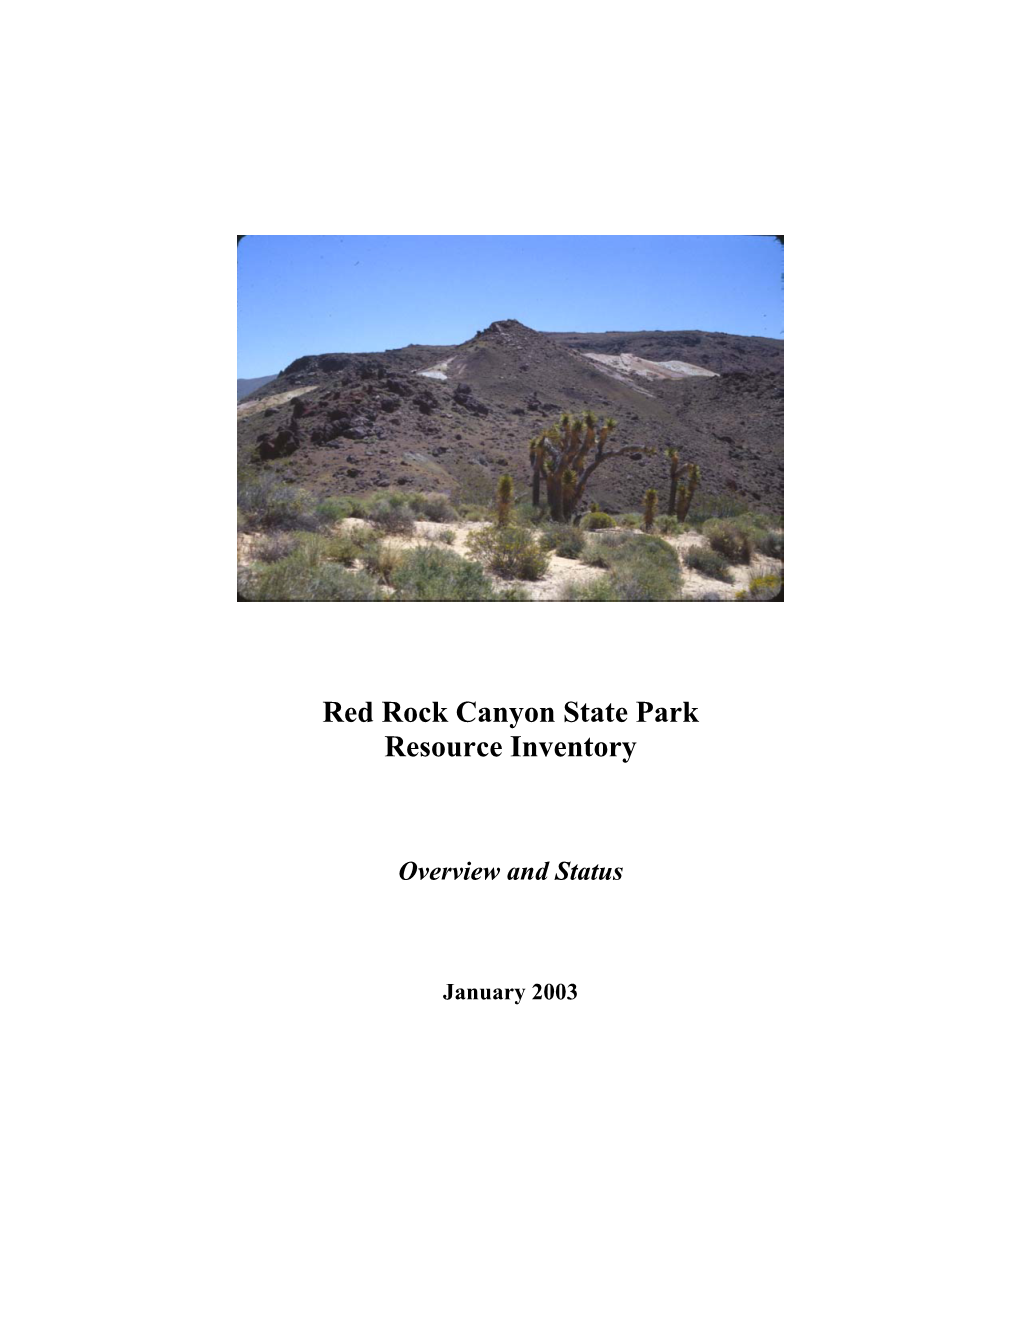 Red Rock Canyon State Park Resource Inventory